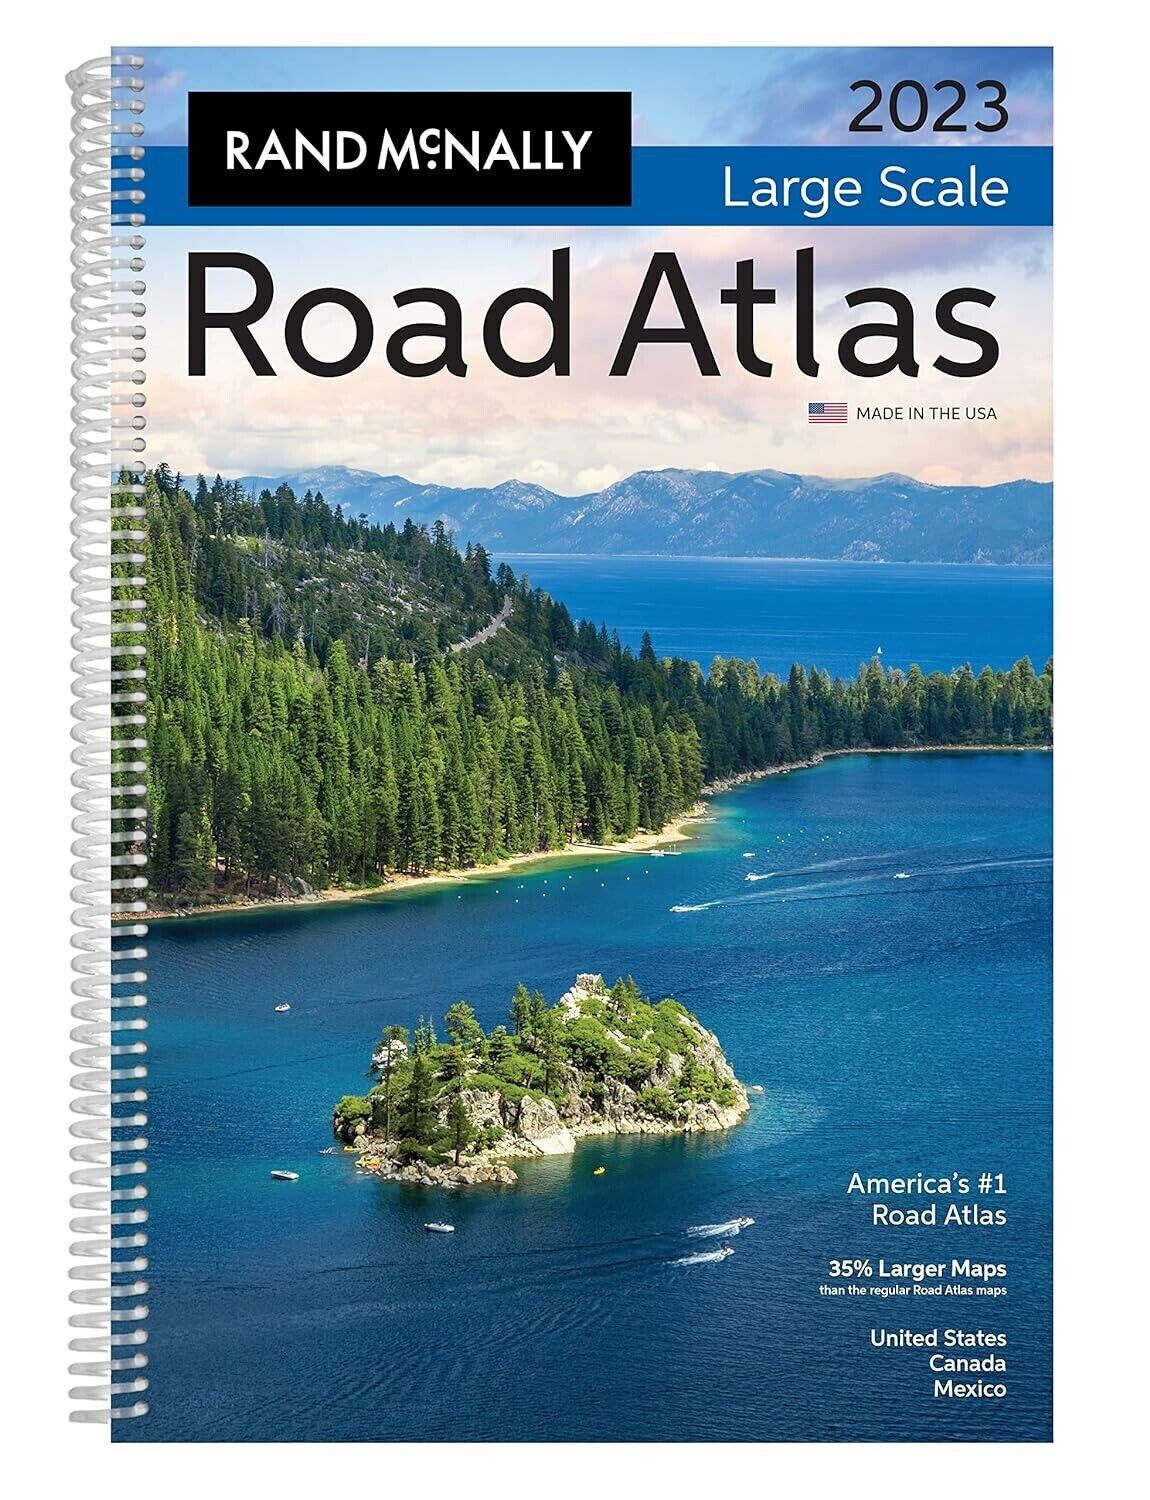 Rand Mcnally 2023 Large Scale Road Atlas USA Canada Mexico spiral bound